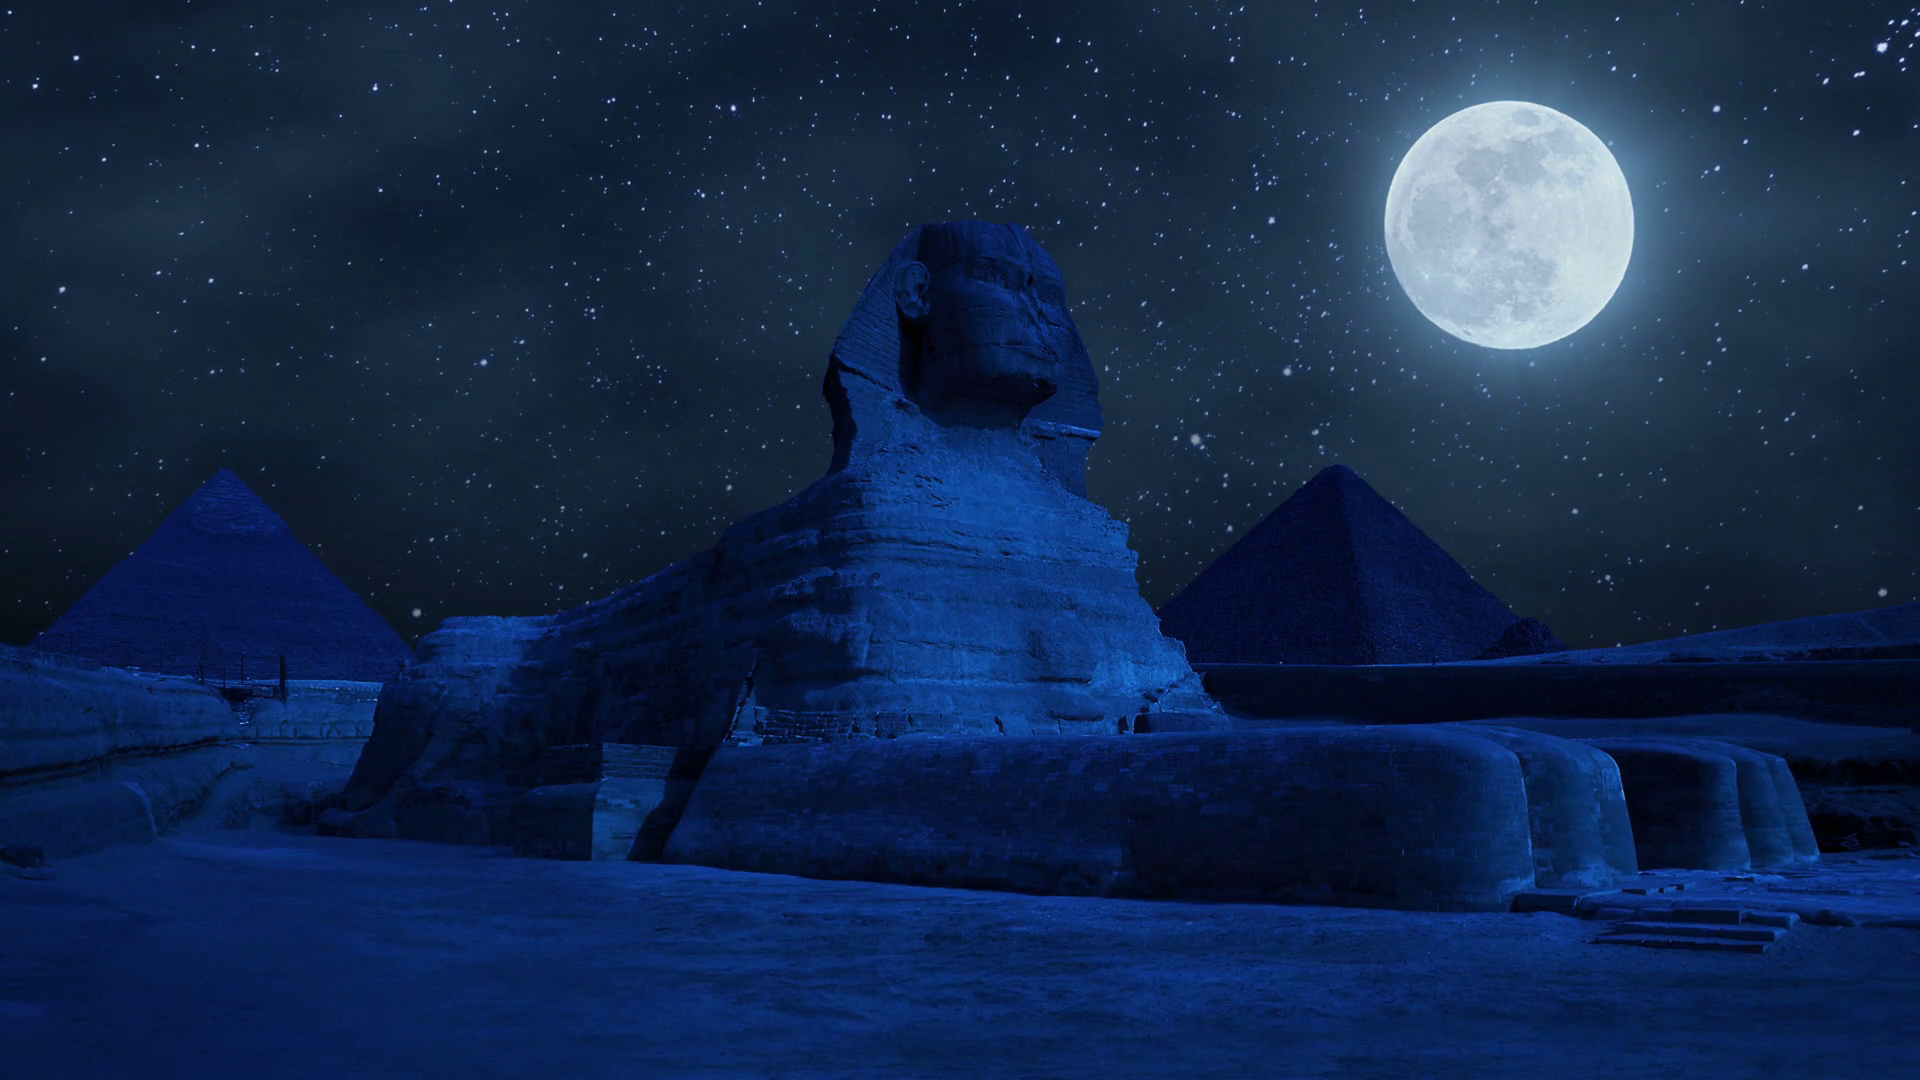 videoblocks-night-timelapse-of-the-famous-sphinx-with-great-pyramids-in-giza-valley-during-super-moon-cairo-egypt_r_5jd84yg_thumbnail-full01